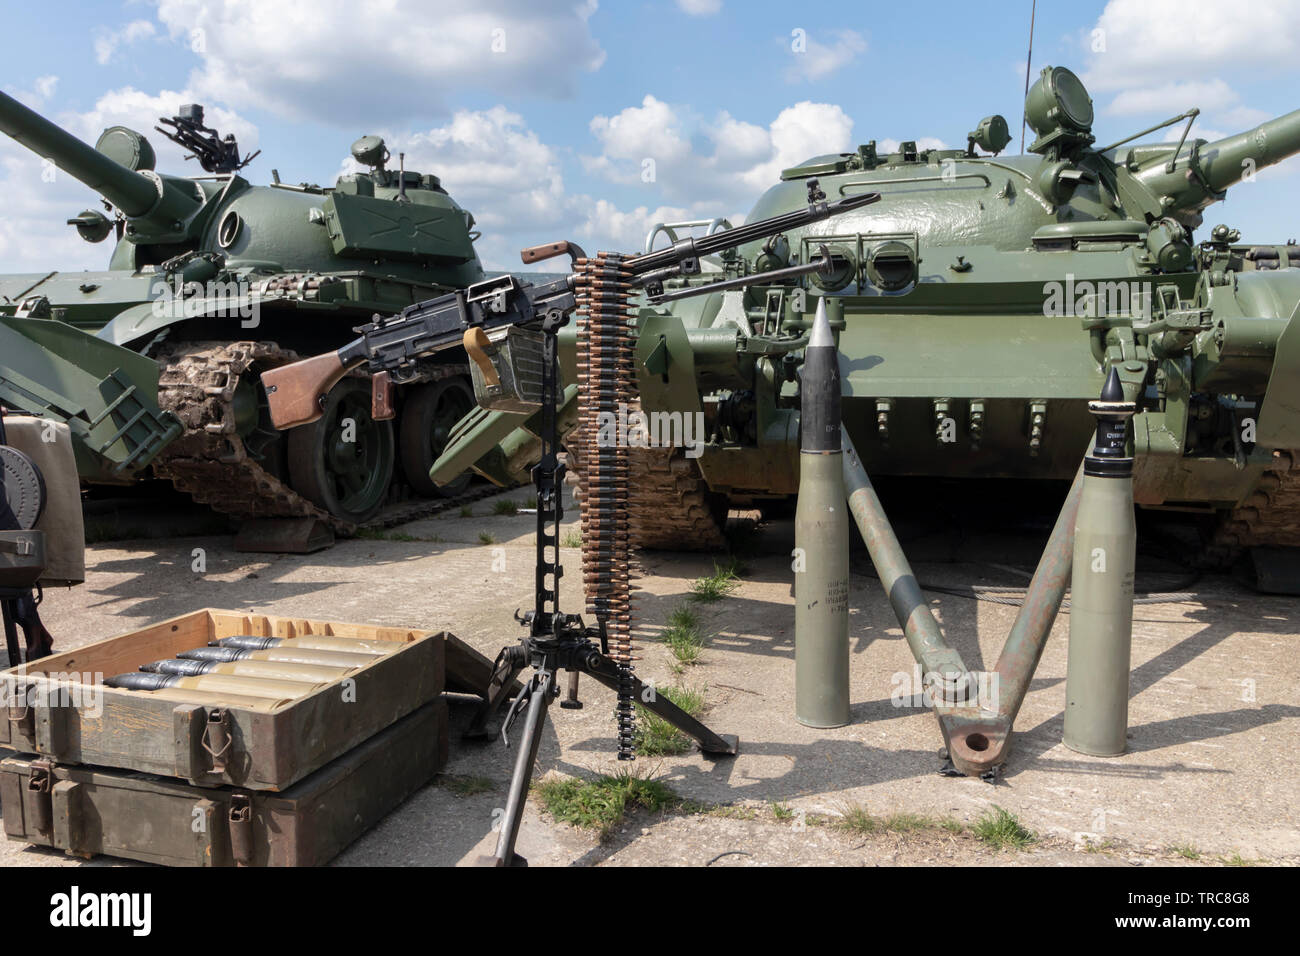 BUDAPEST/HUNGARY - 05.18, 2019: Old Russian weaponry in the field: tank shells in ammo crates, 120 mm rounds placed upwards, heavy machine gun on trip Stock Photo